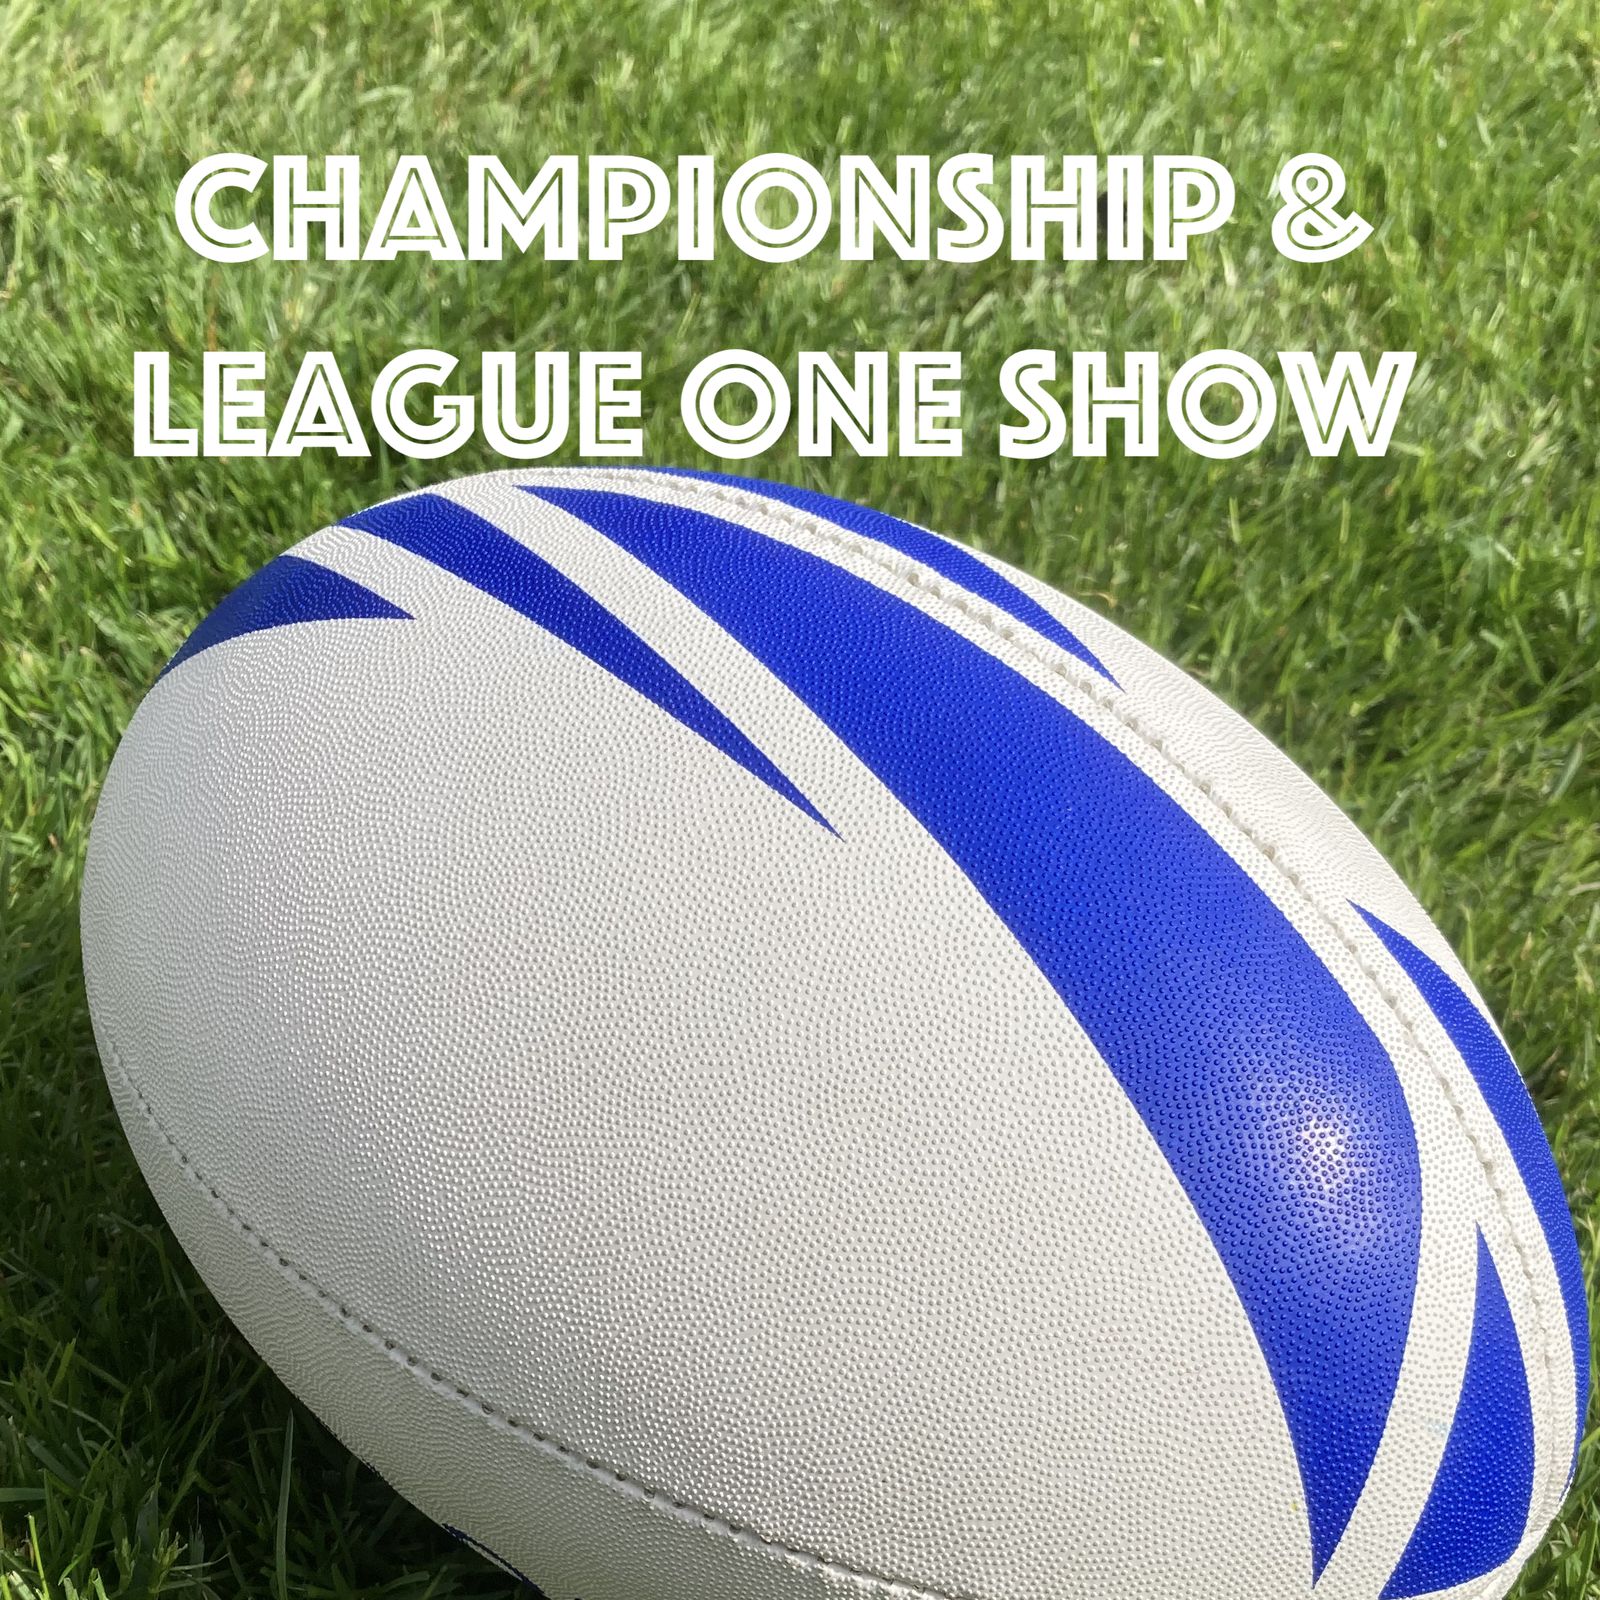 The Championship and League One Show